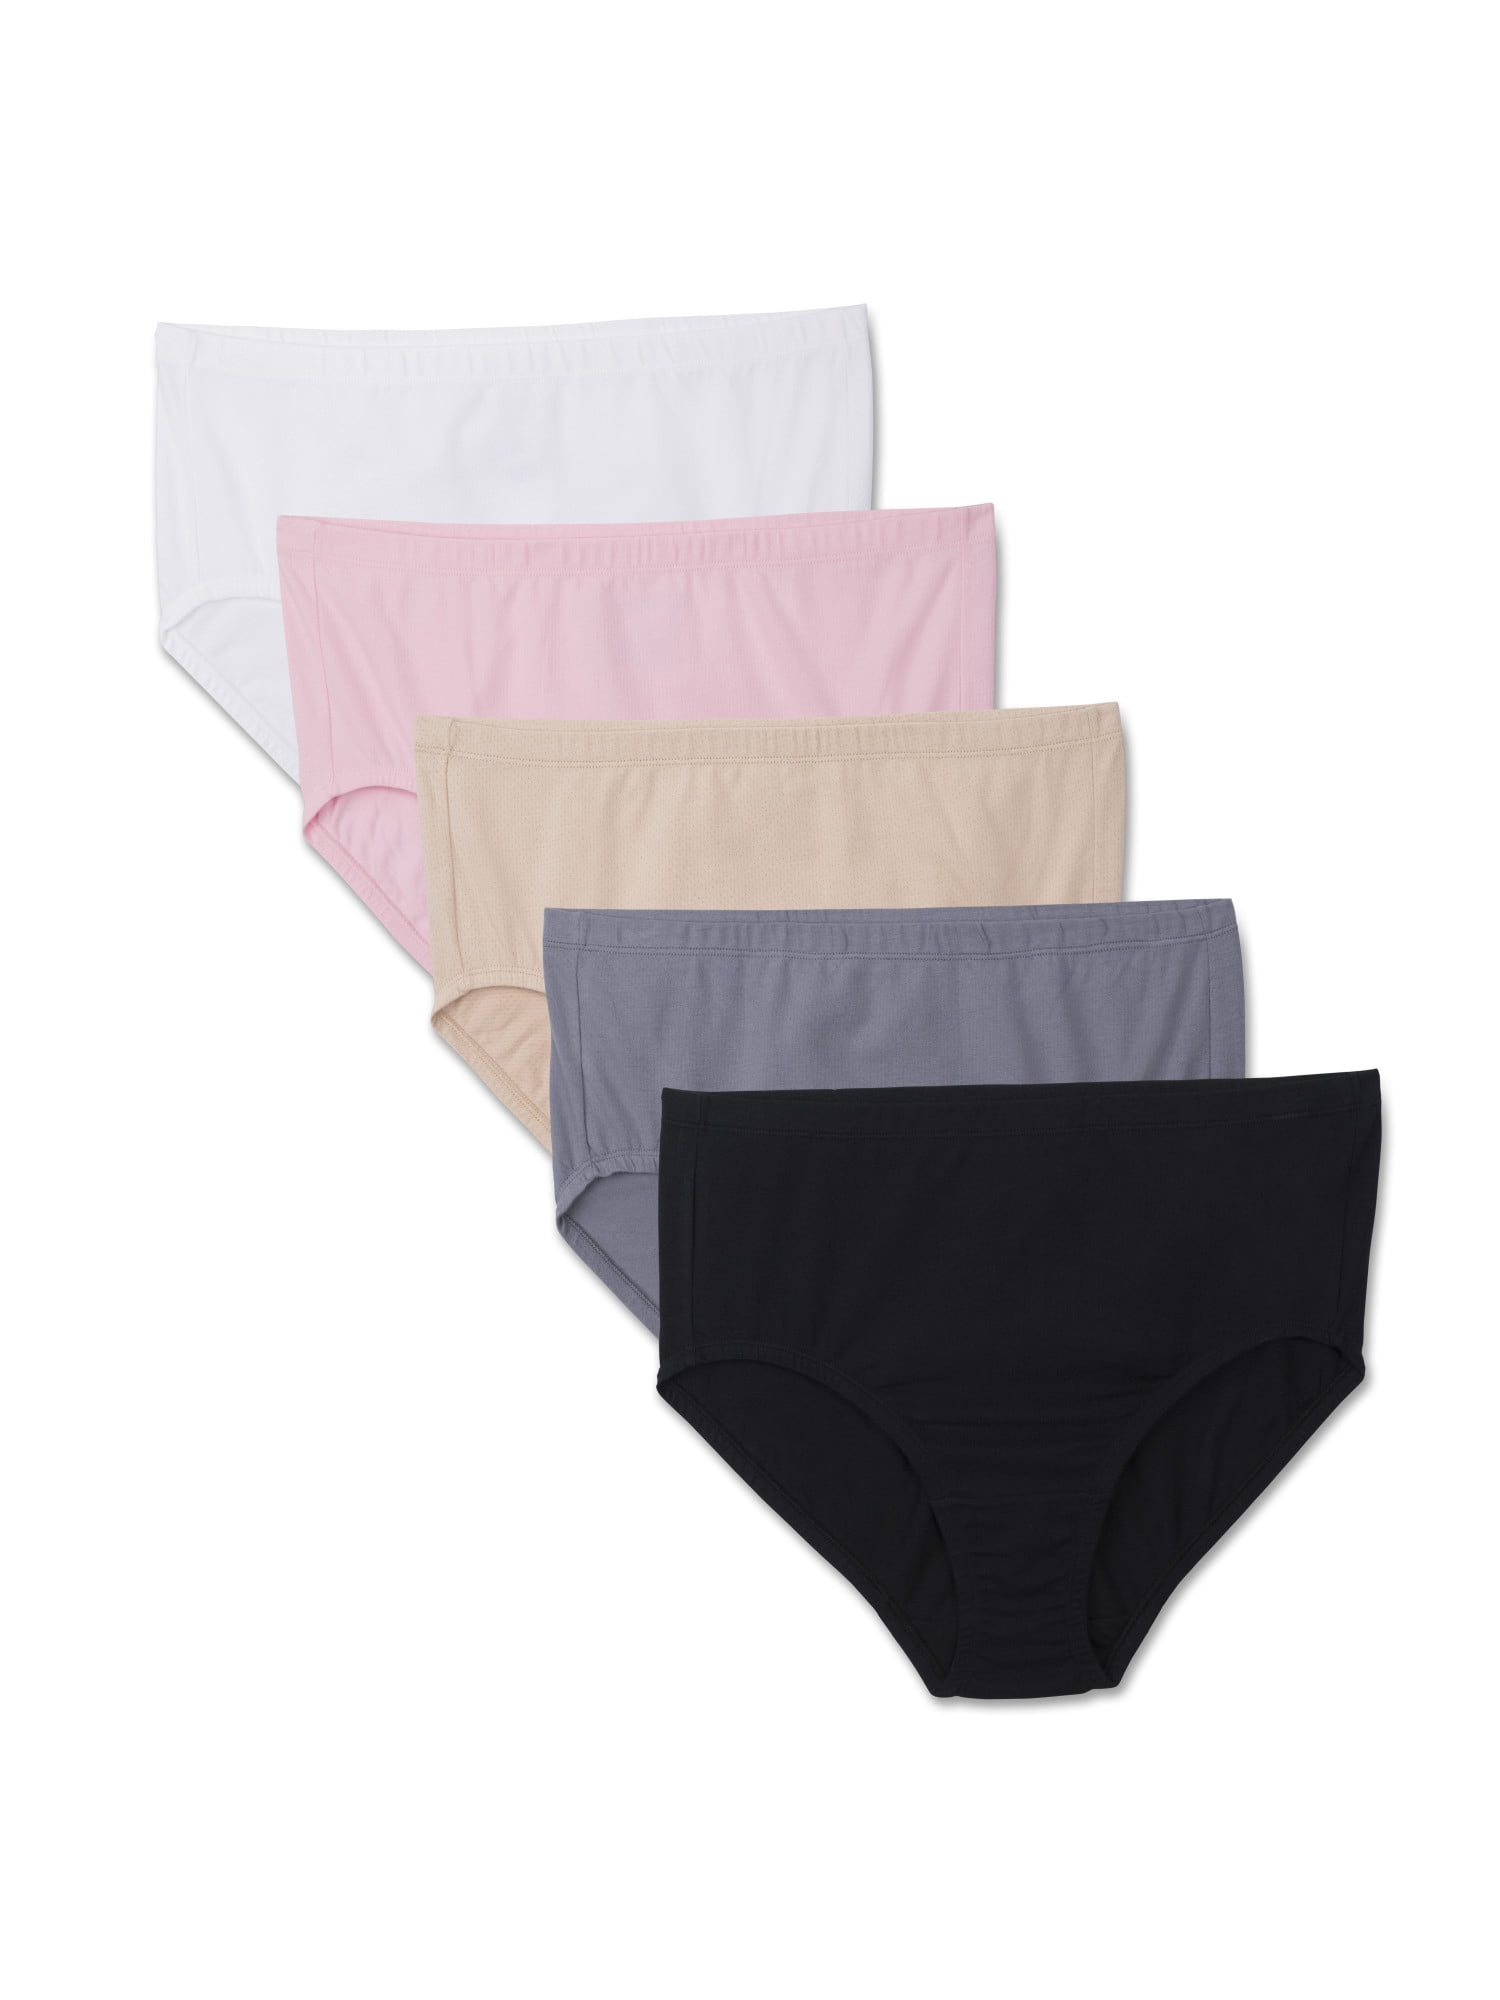 Fruit of the Loom Women's Plus Size Fit For Me 5 Pack Cotton Brief Panties